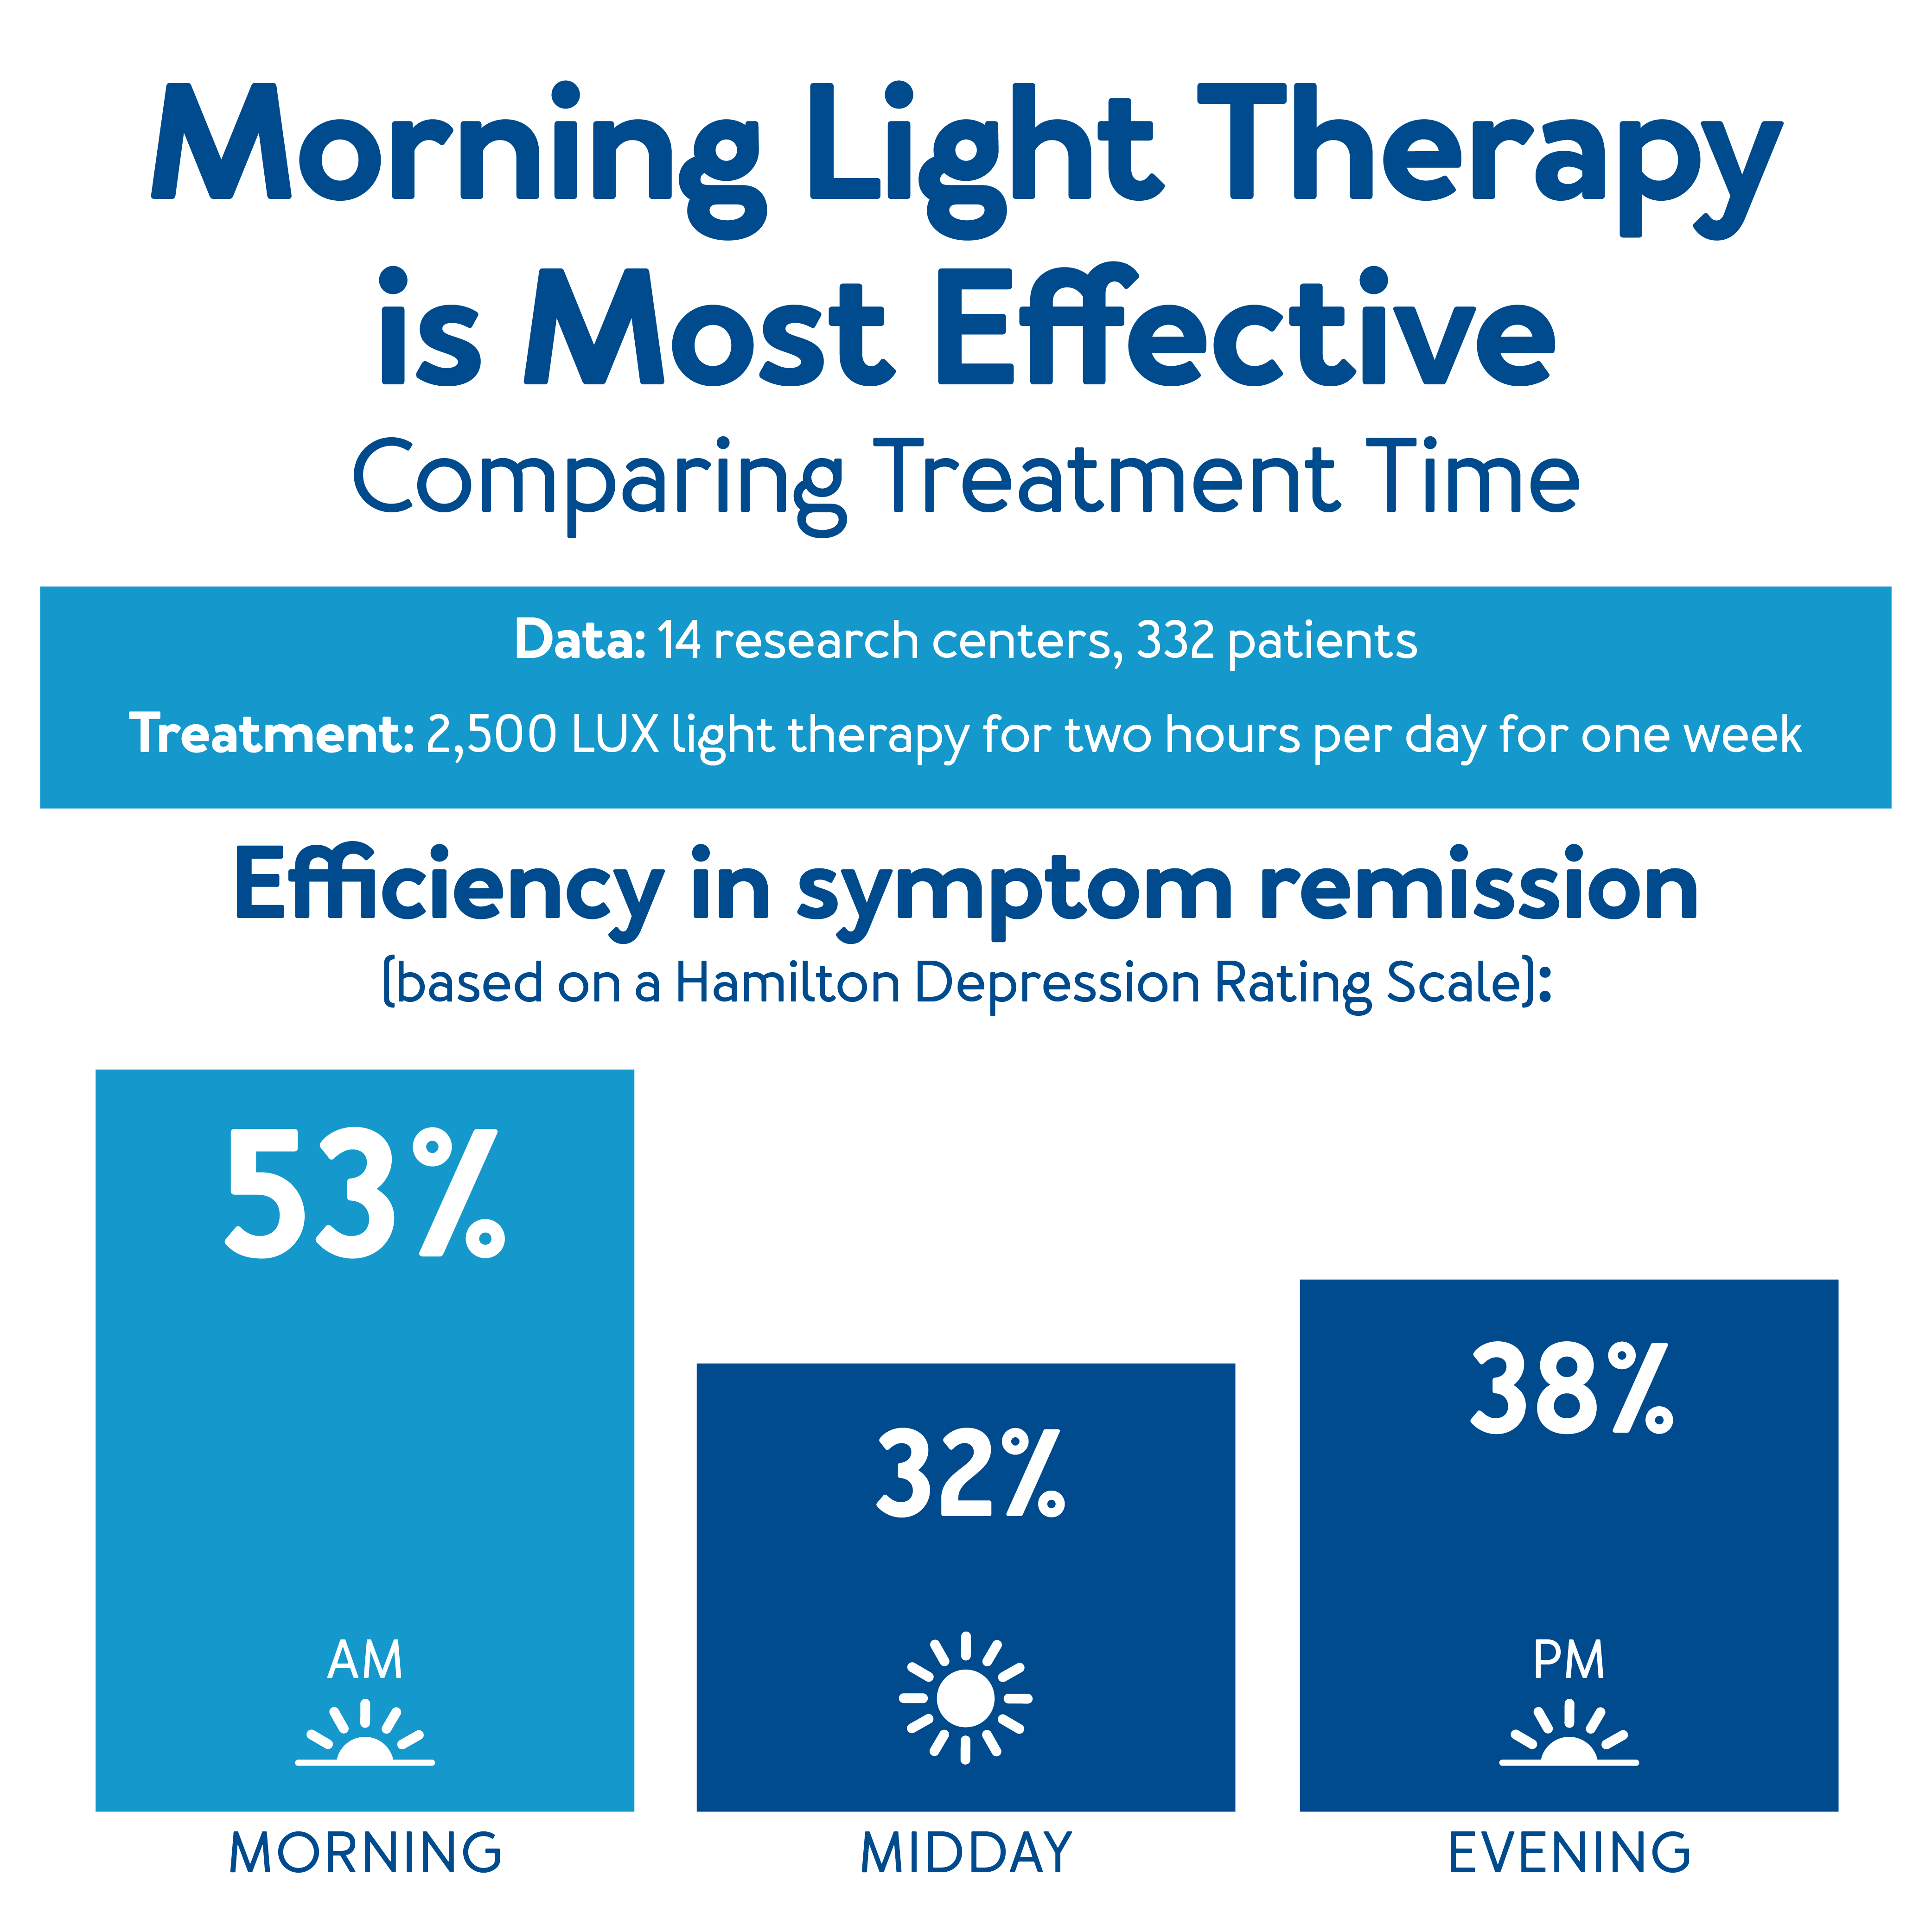 Does Light Therapy Work? - Infographic Carex